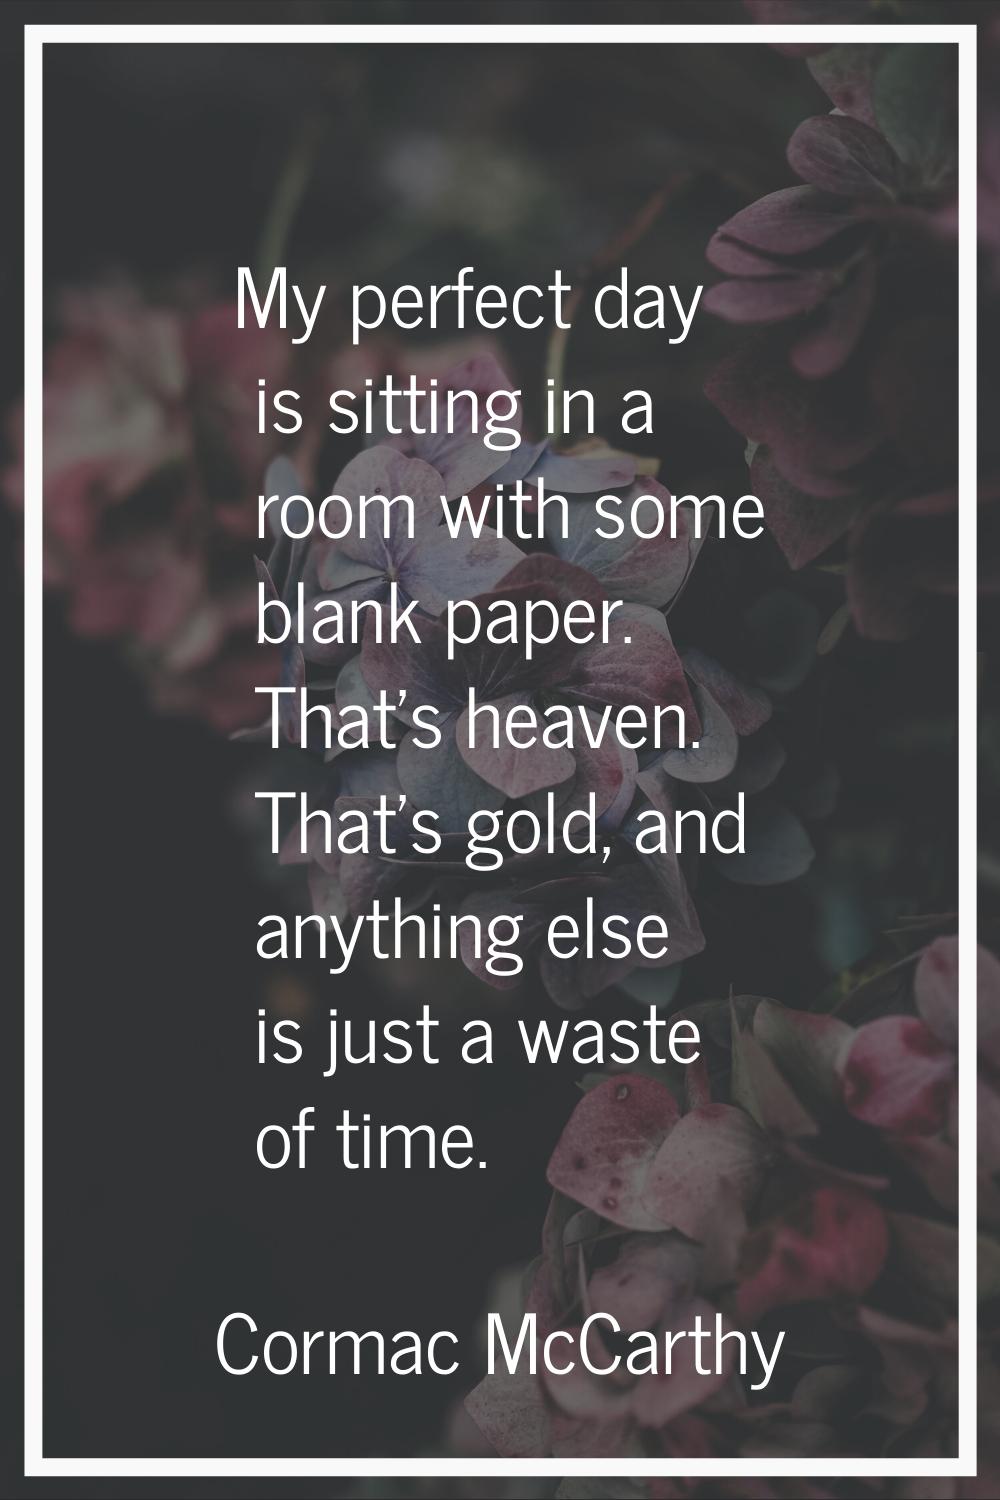 My perfect day is sitting in a room with some blank paper. That's heaven. That's gold, and anything